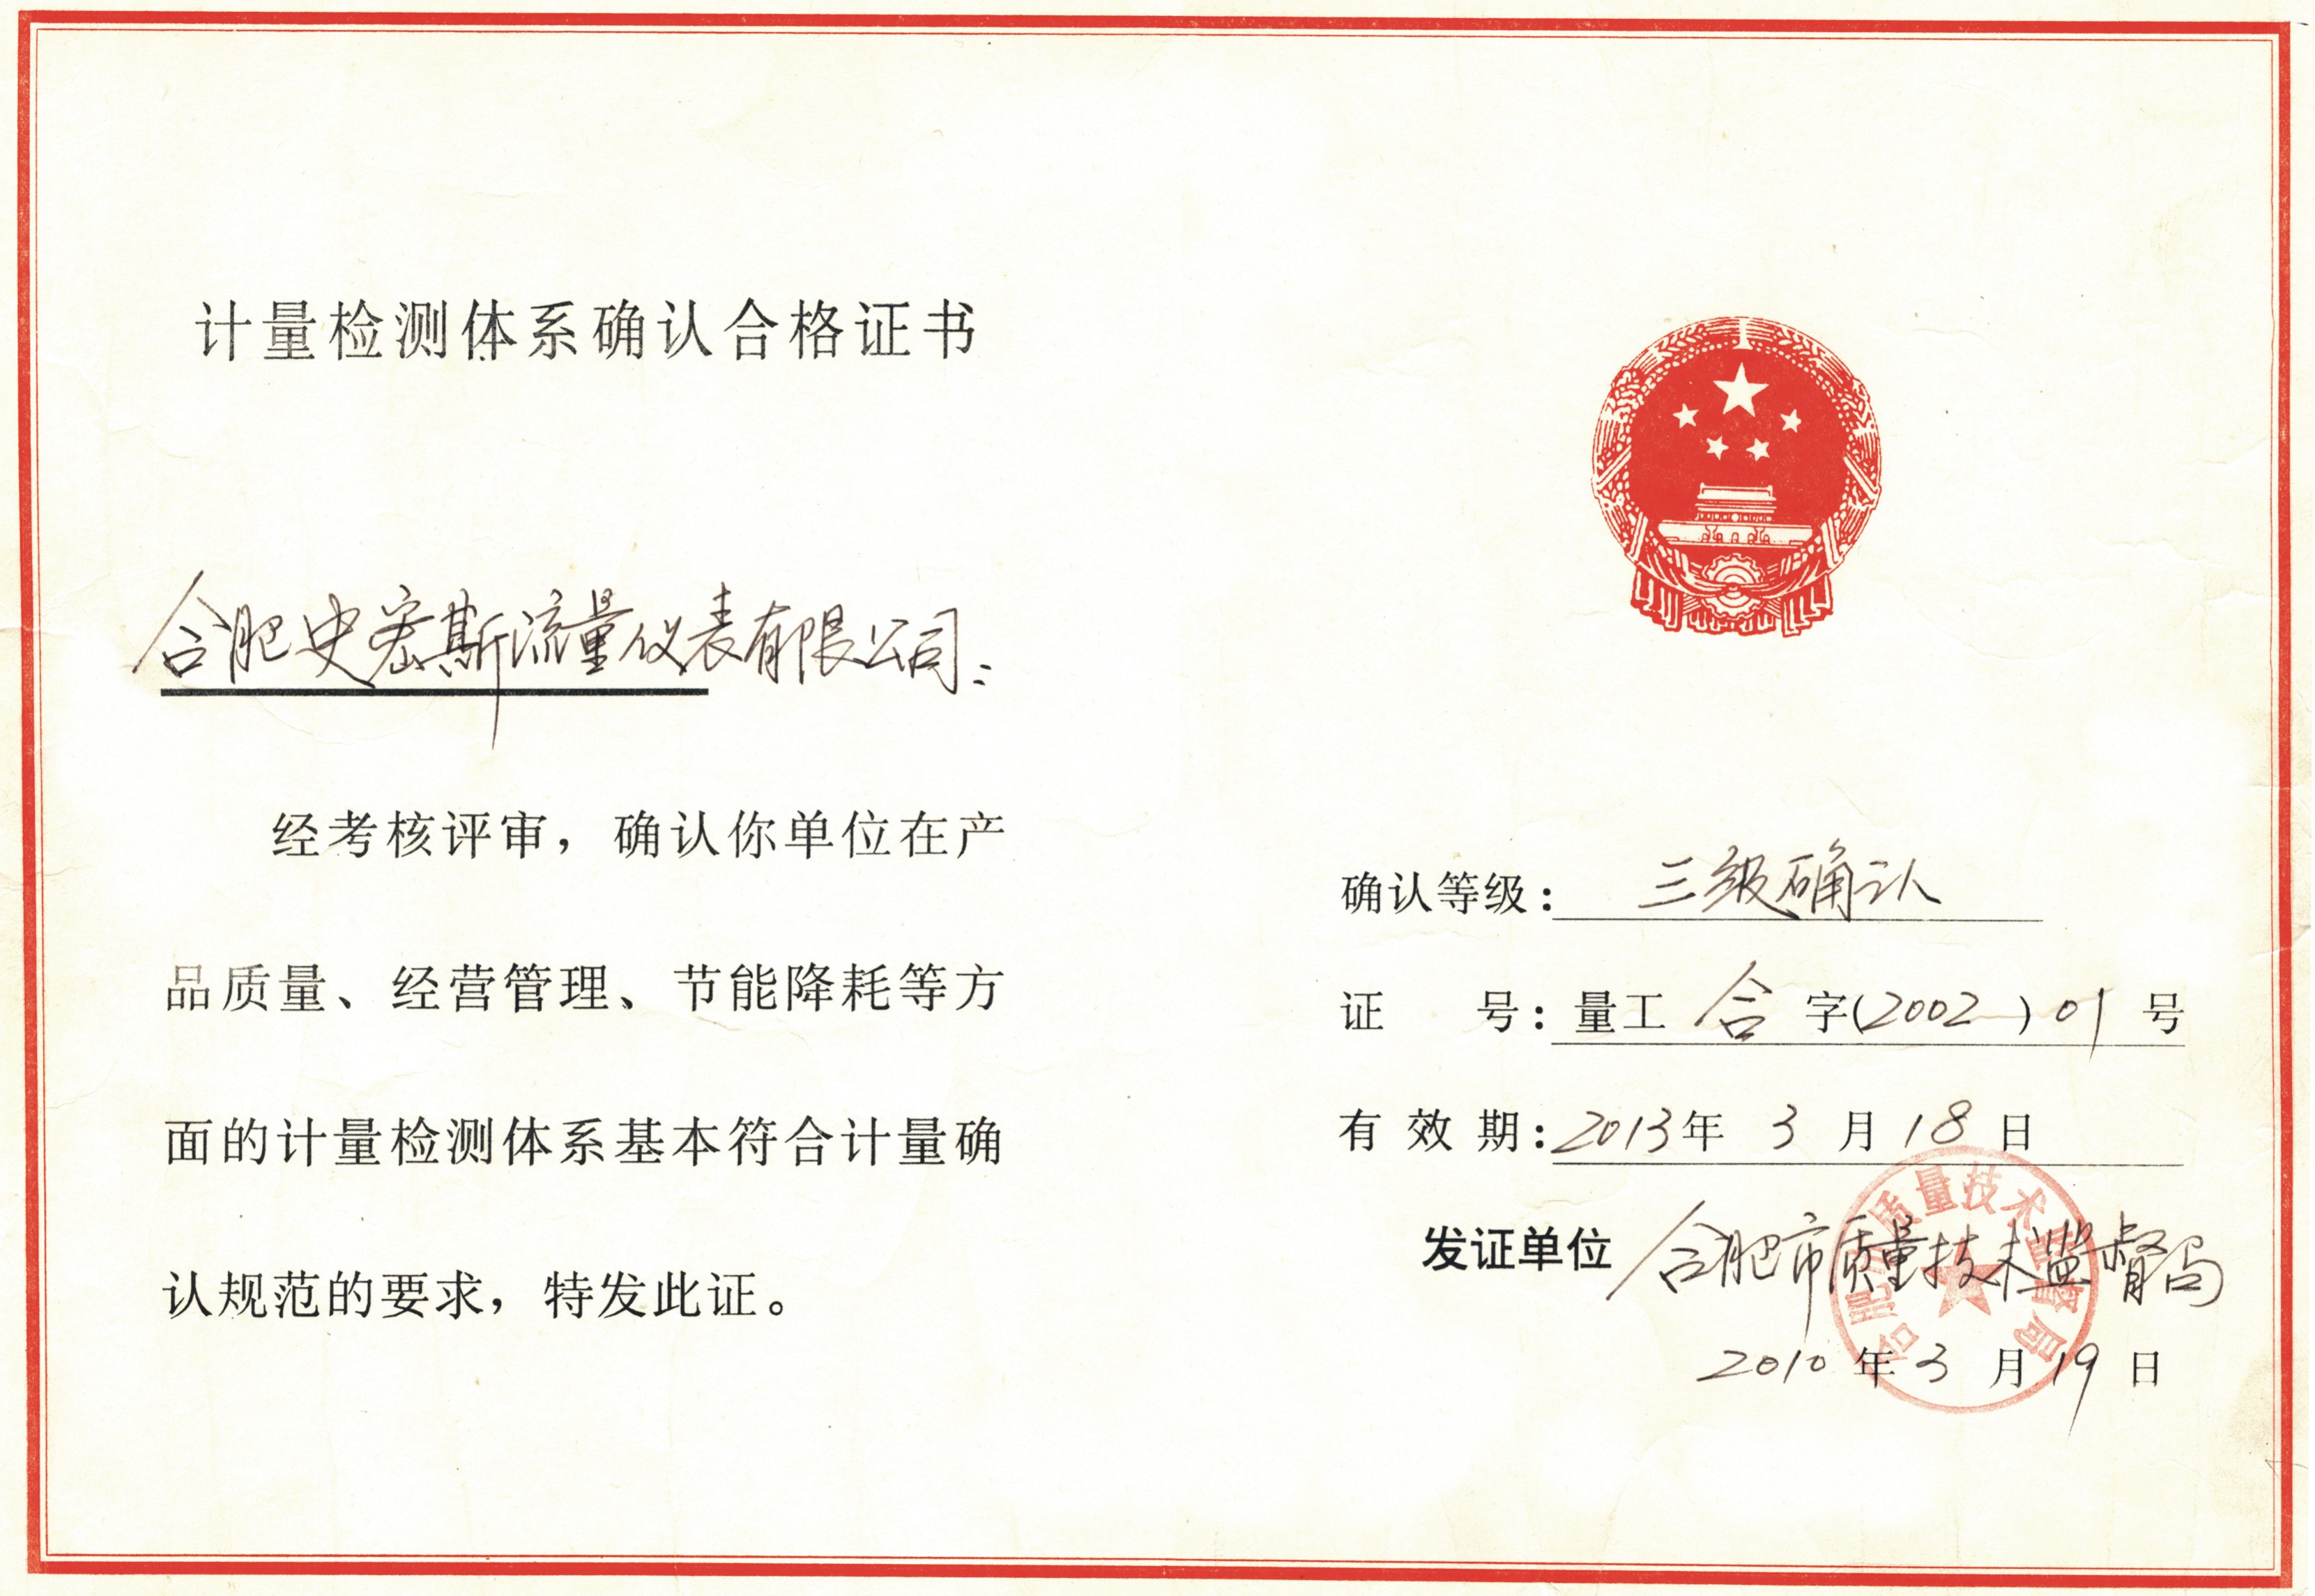 Measuring system confirmation certificate